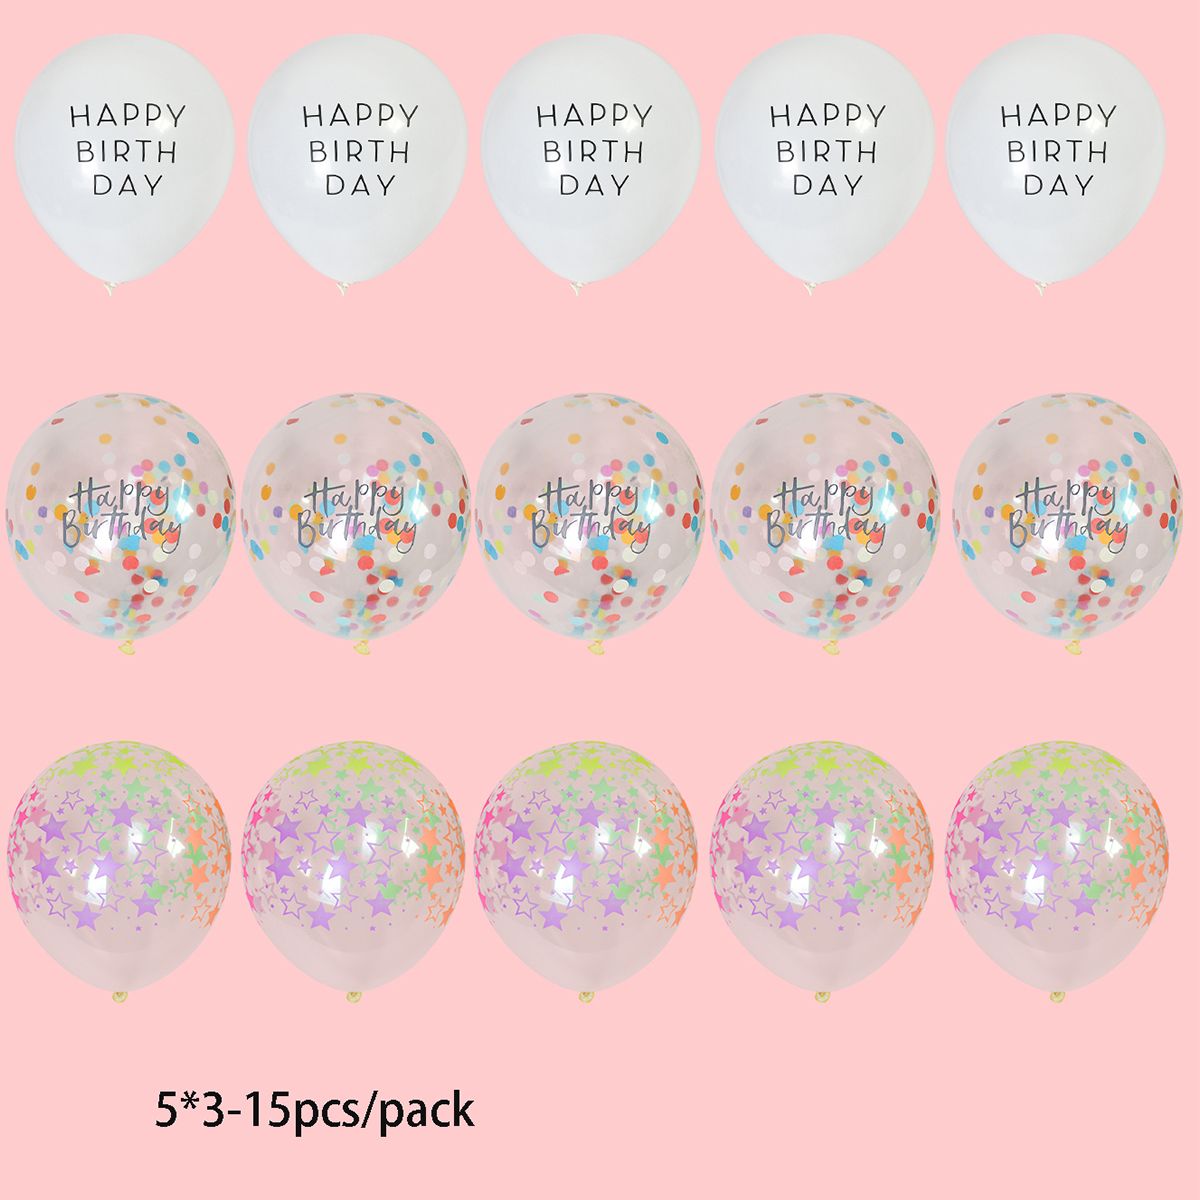 15-pack Happy Birthday Balloons Decor Colorful Dots Stars Letter Latex Balloons Birthday Party Supplies